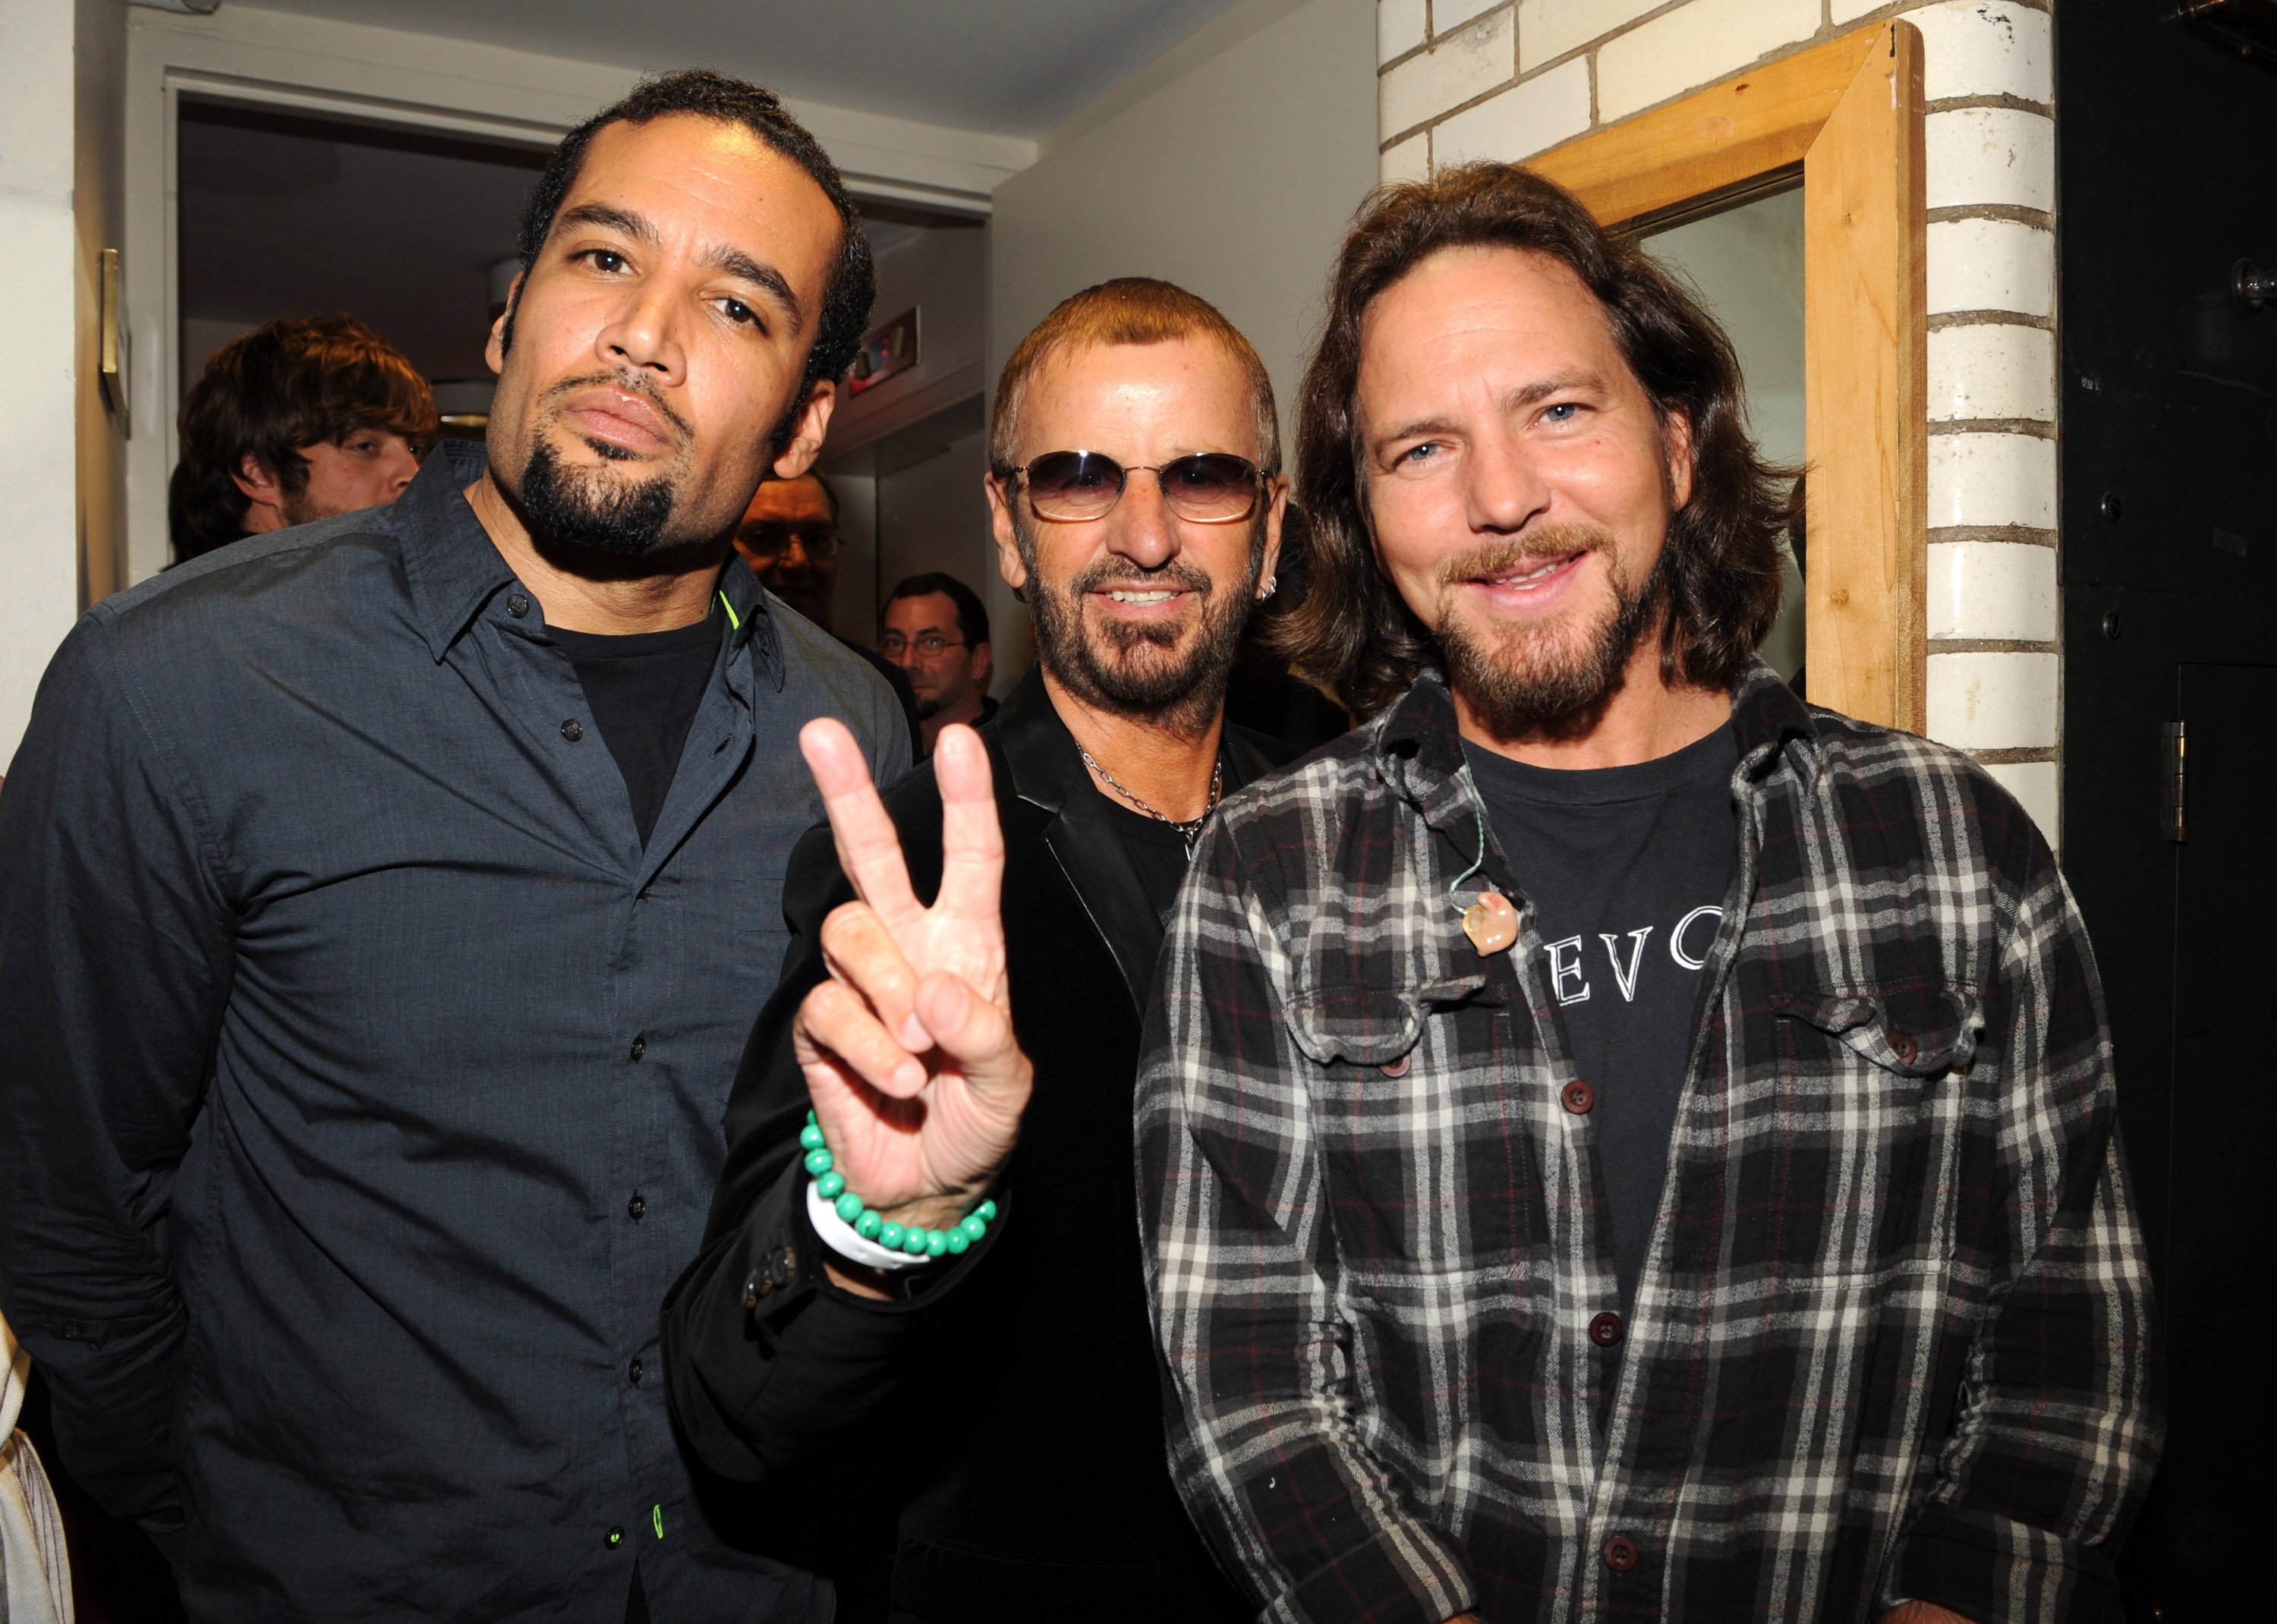 Eddie Vedder smiles, Ringo Starr makes a peace sign as they pose with Ben Harper